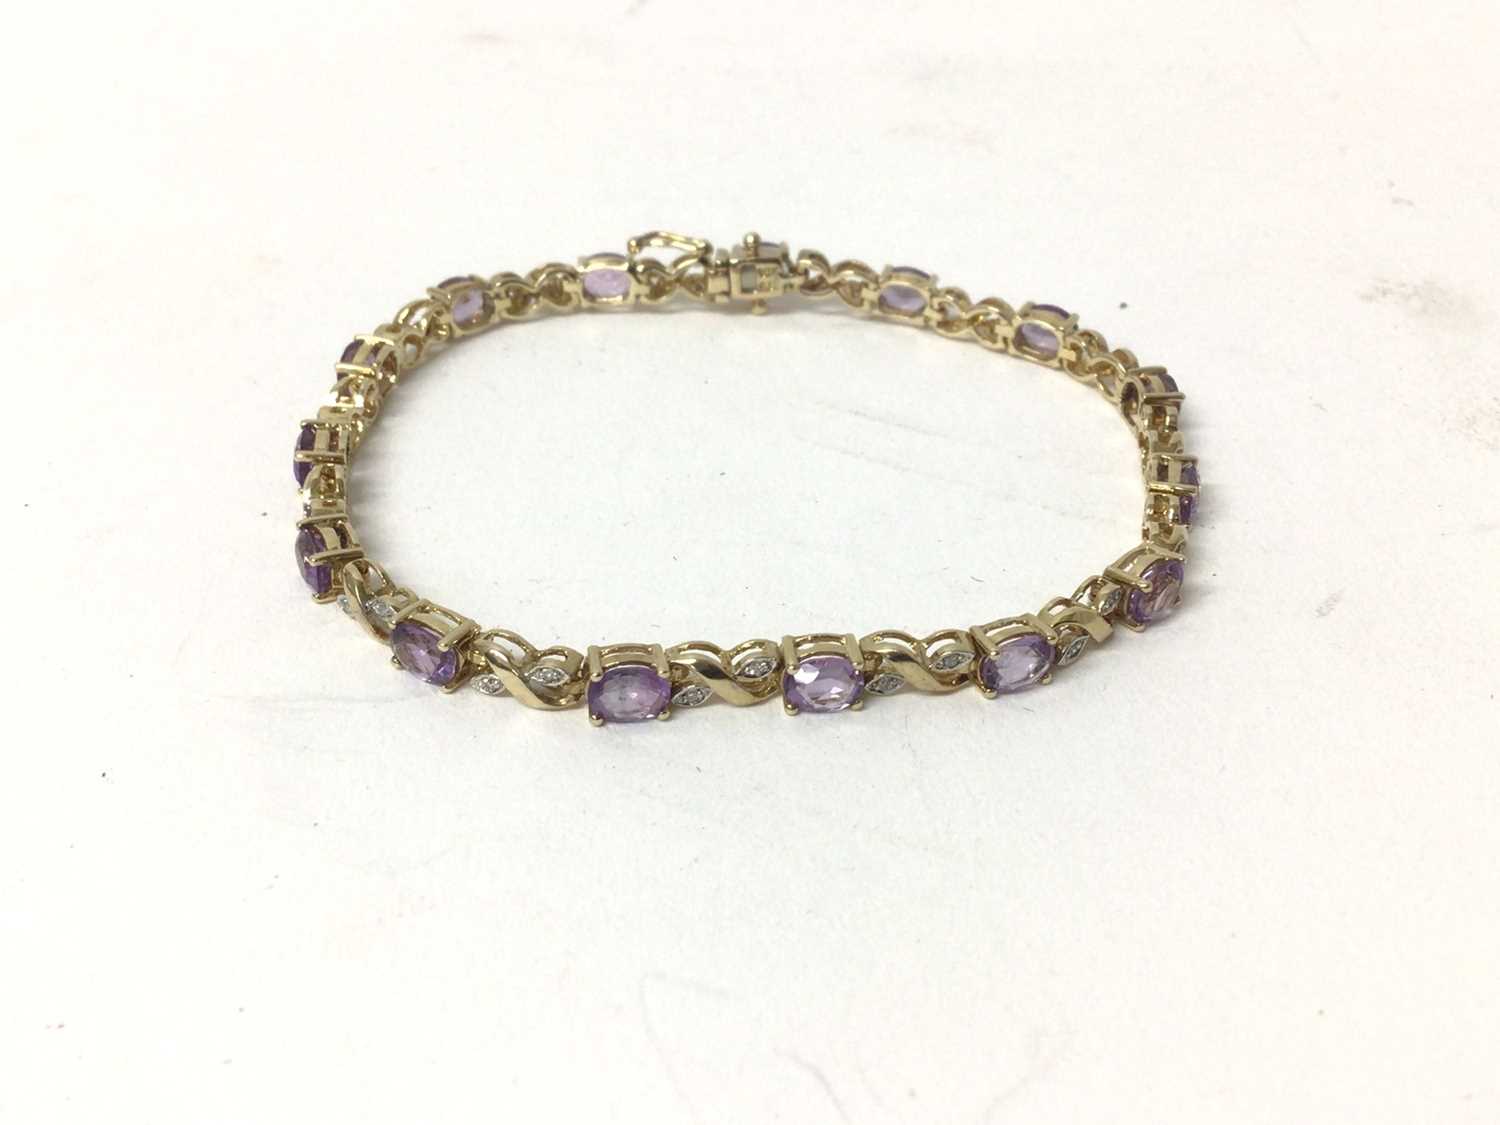 Lot 213 - Amethyst and diamond bracelet with oval mixed cut amethysts and single cut diamonds in 9ct gold setting, 18.5cm length.